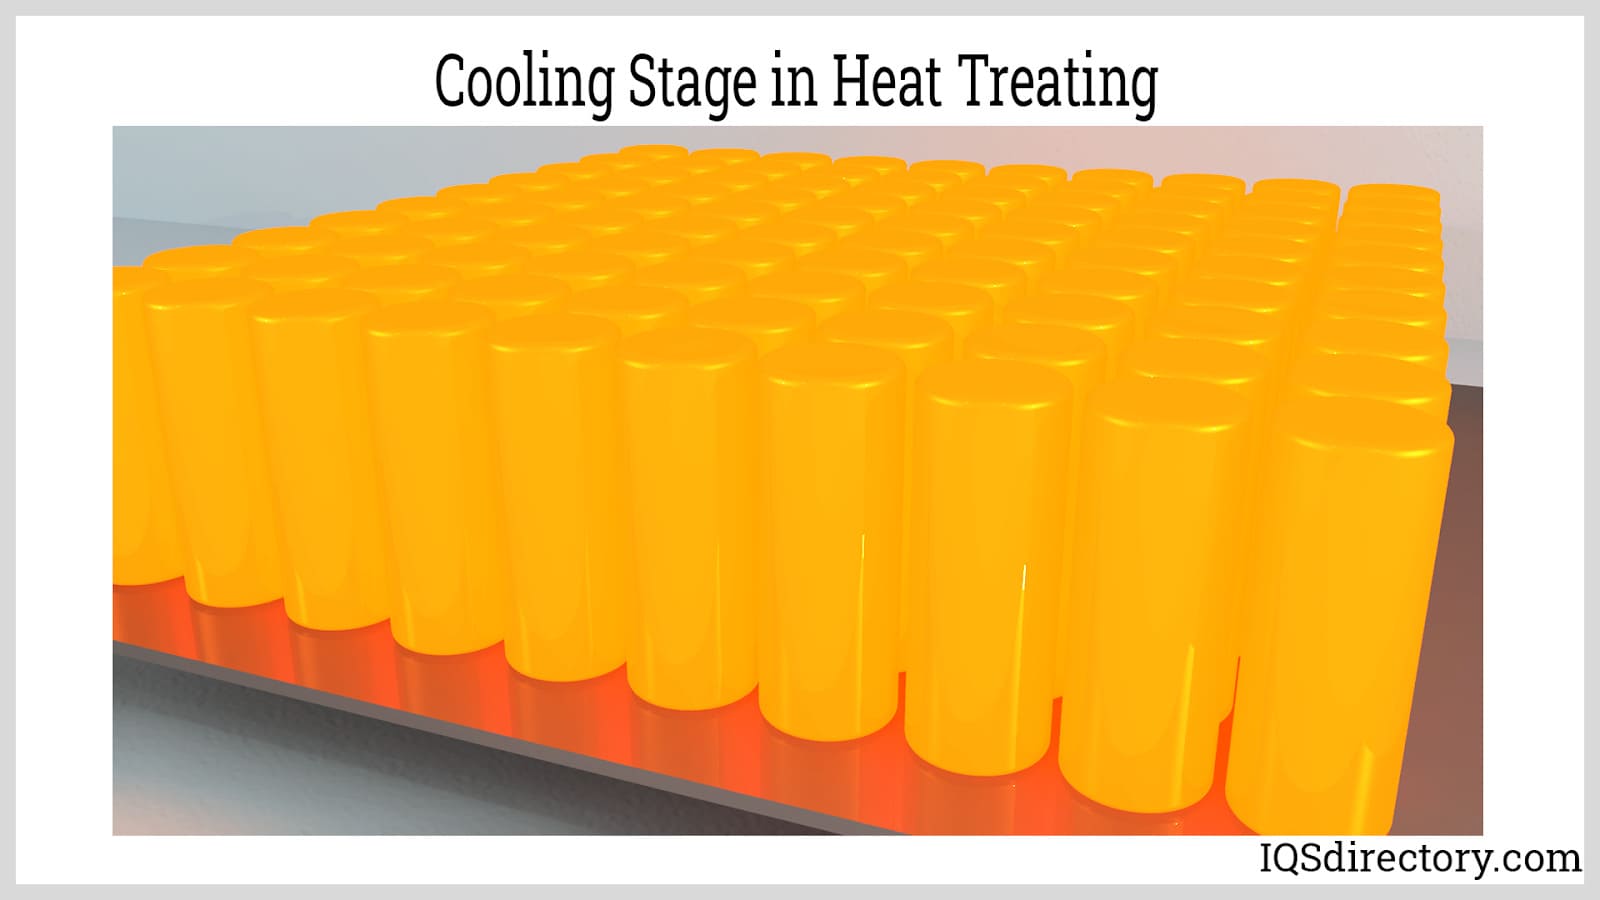 Cooling Stage in Heat Treating